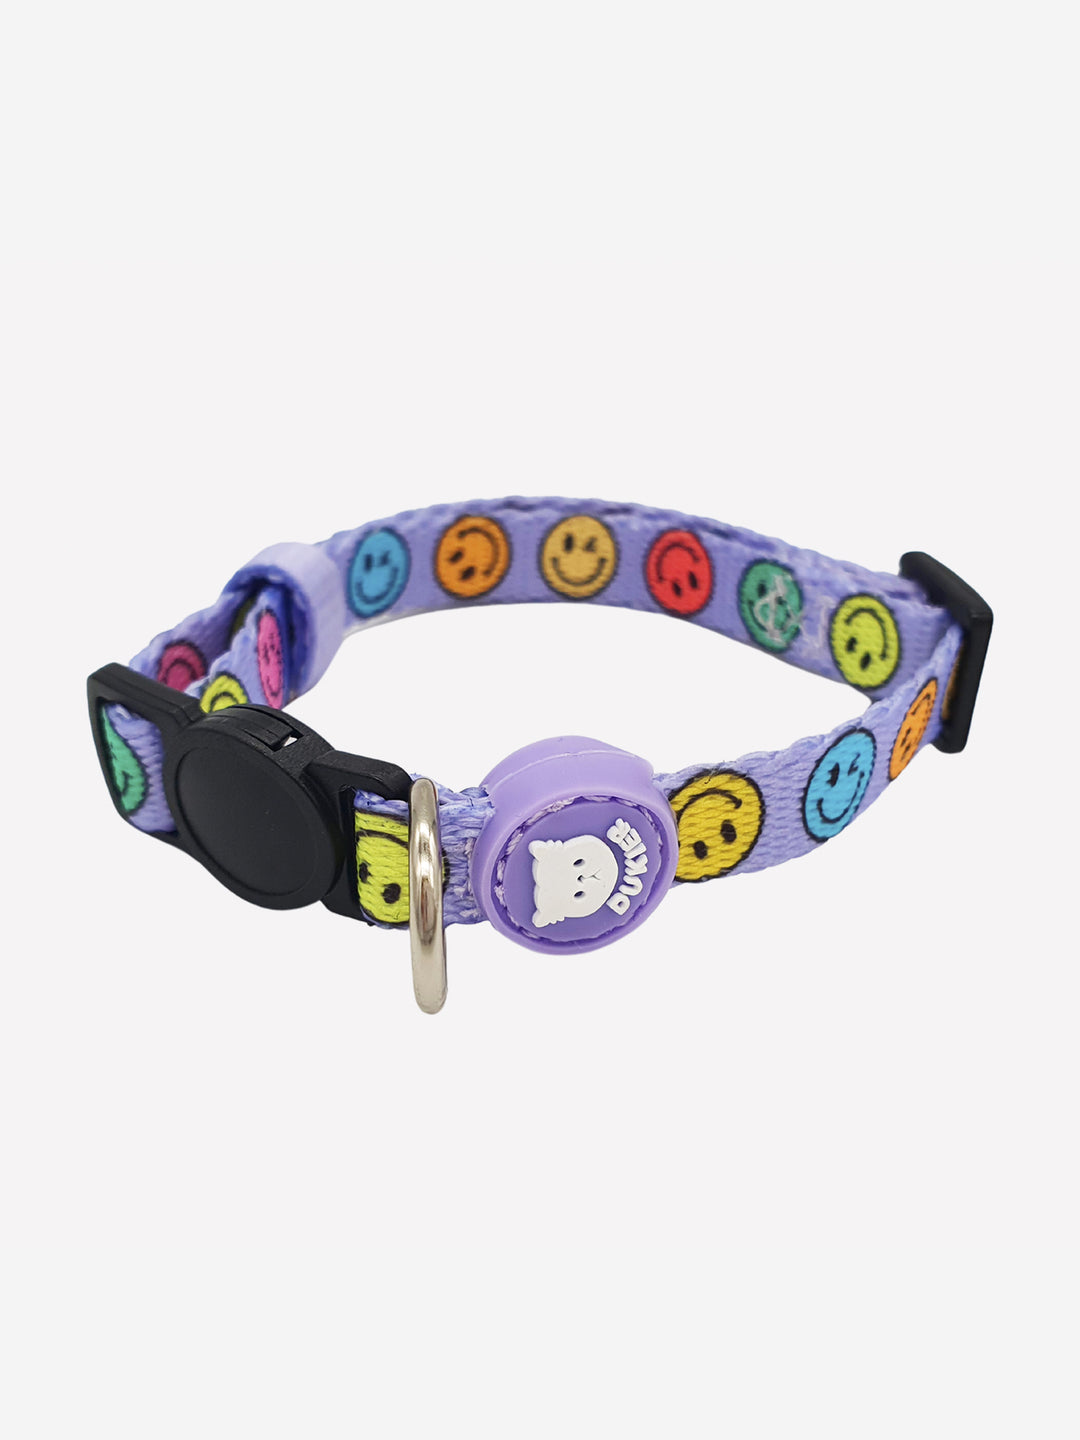 COLLIER SMILEY POUR CHAT 